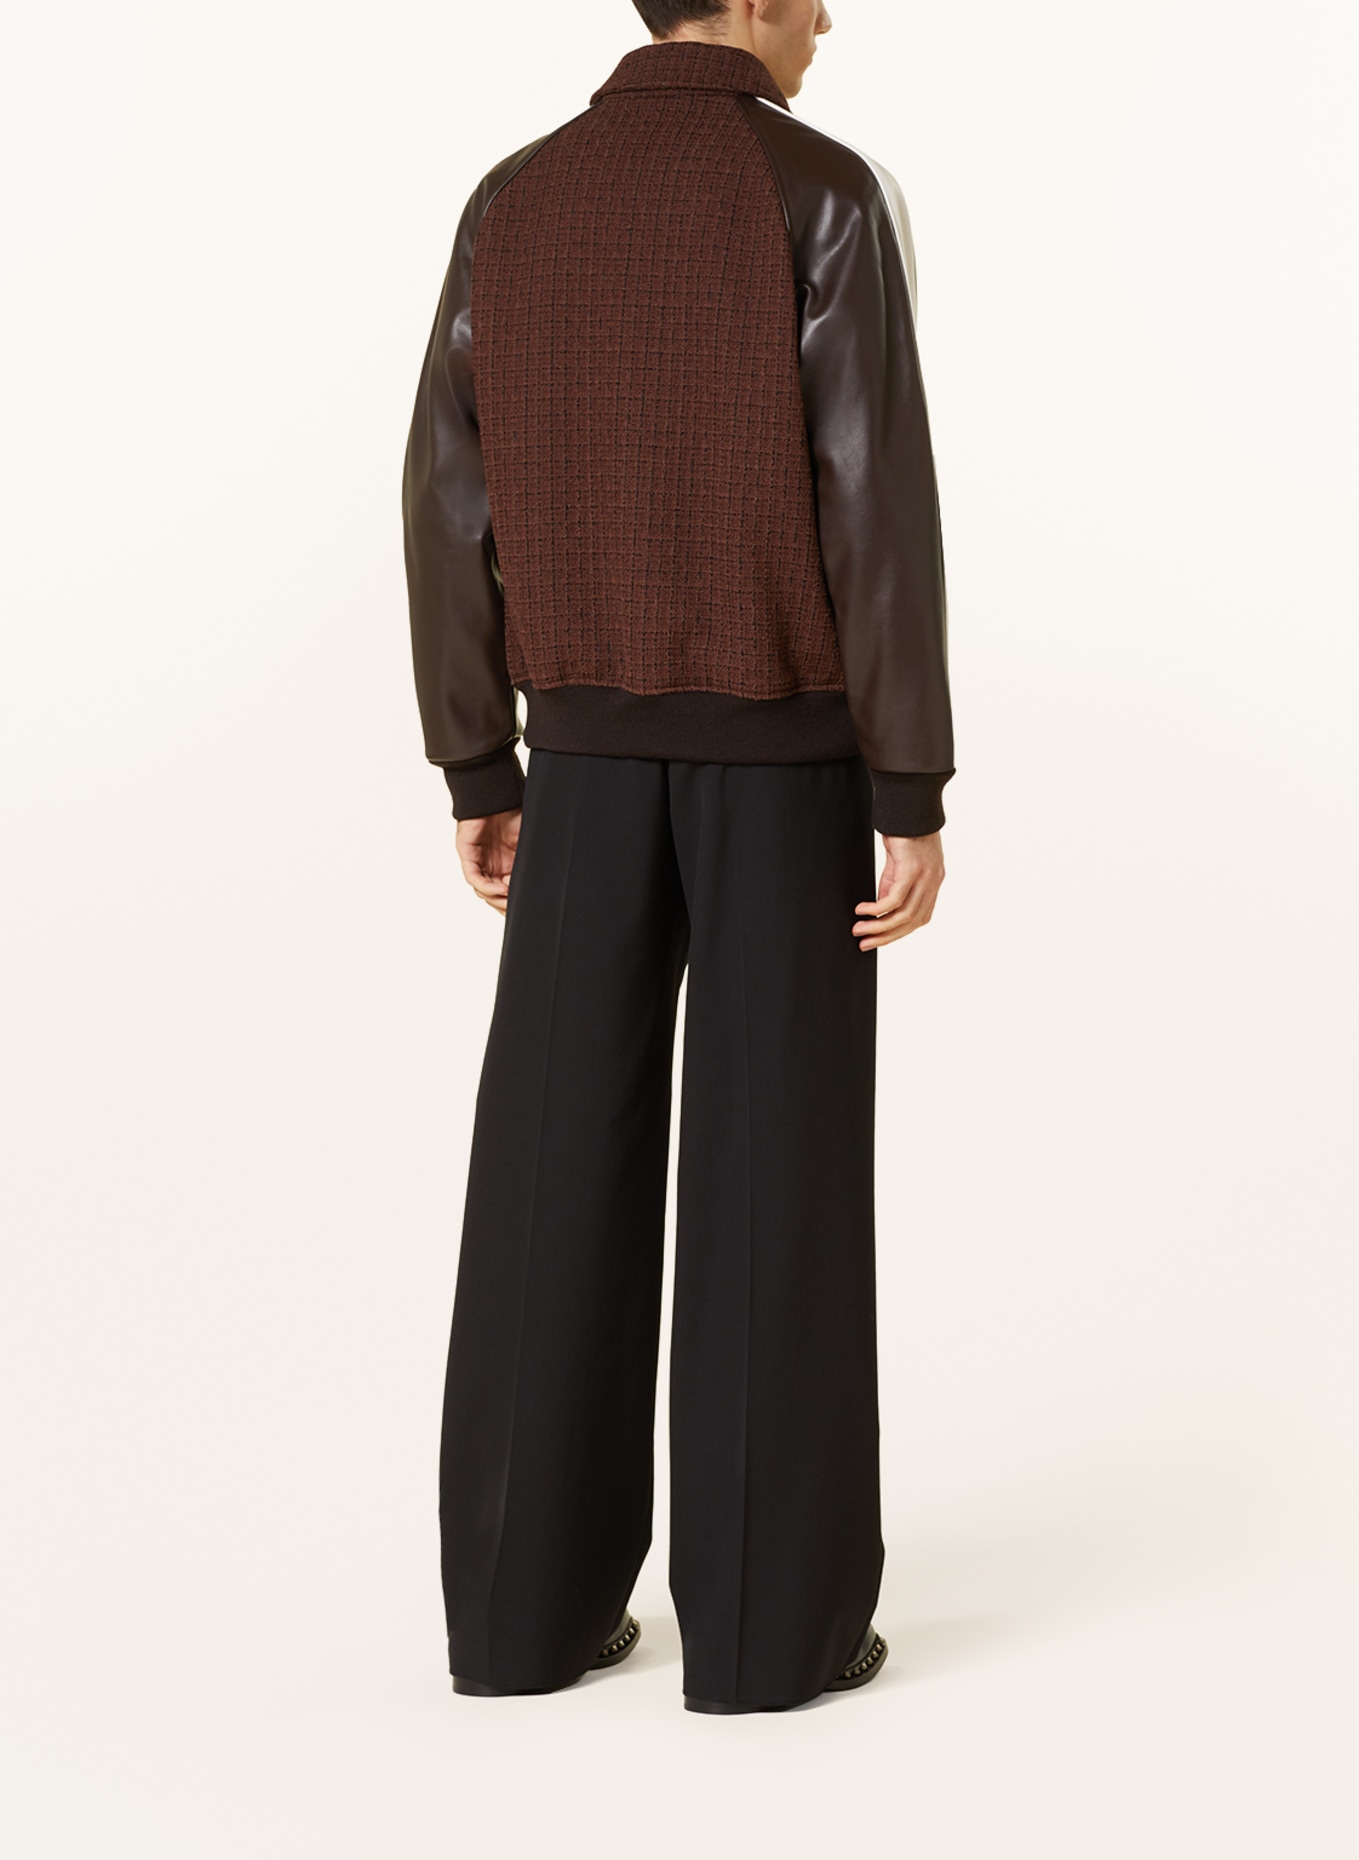 VALENTINO Bomber jacket in mixed materials, Color: BROWN/ DARK BROWN/ WHITE (Image 3)